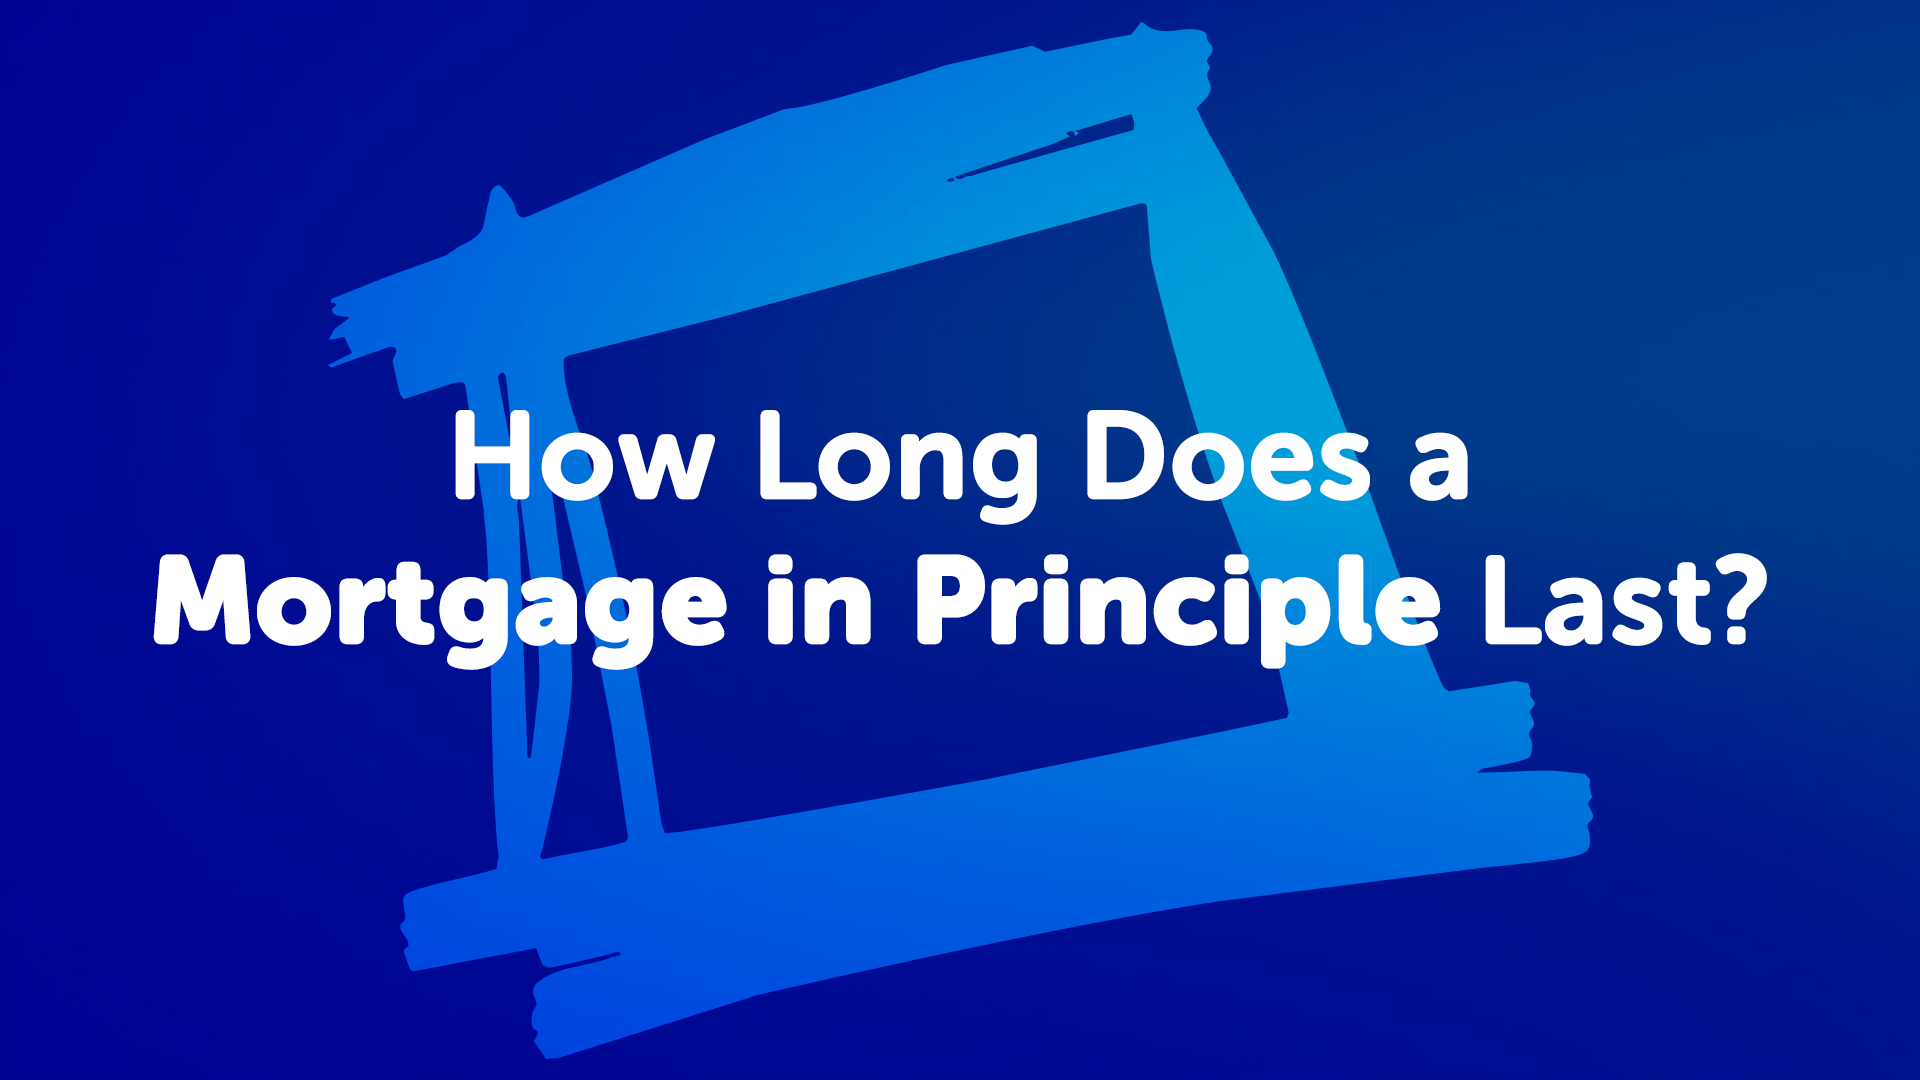 How Long Does a Mortgage in Principle Last